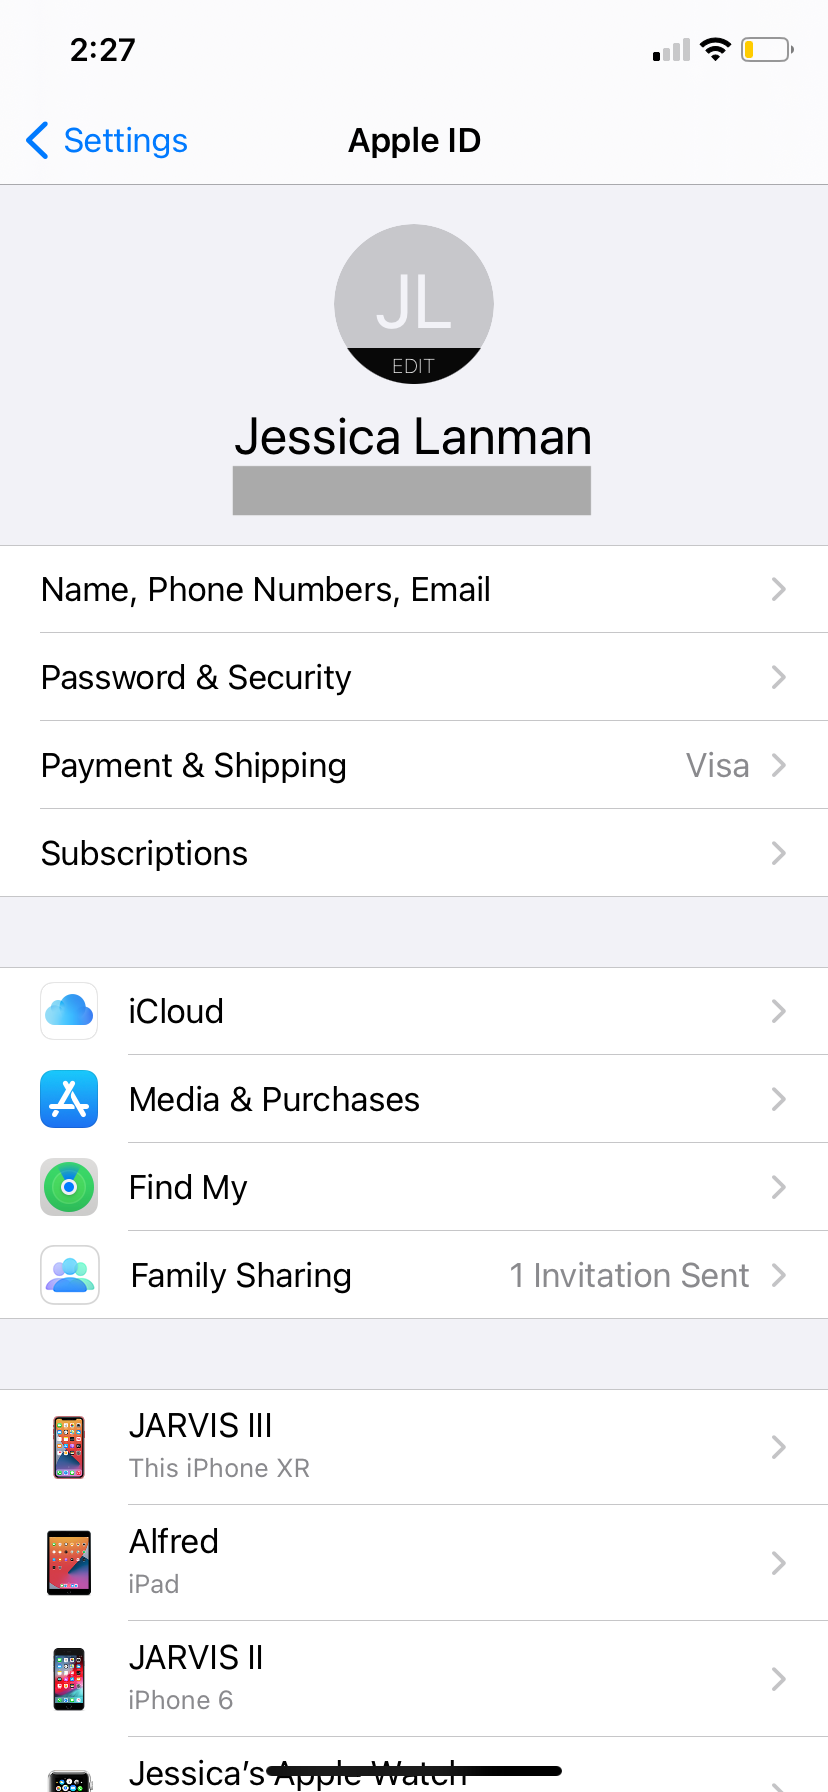 The Apple ID settings on an iPhone